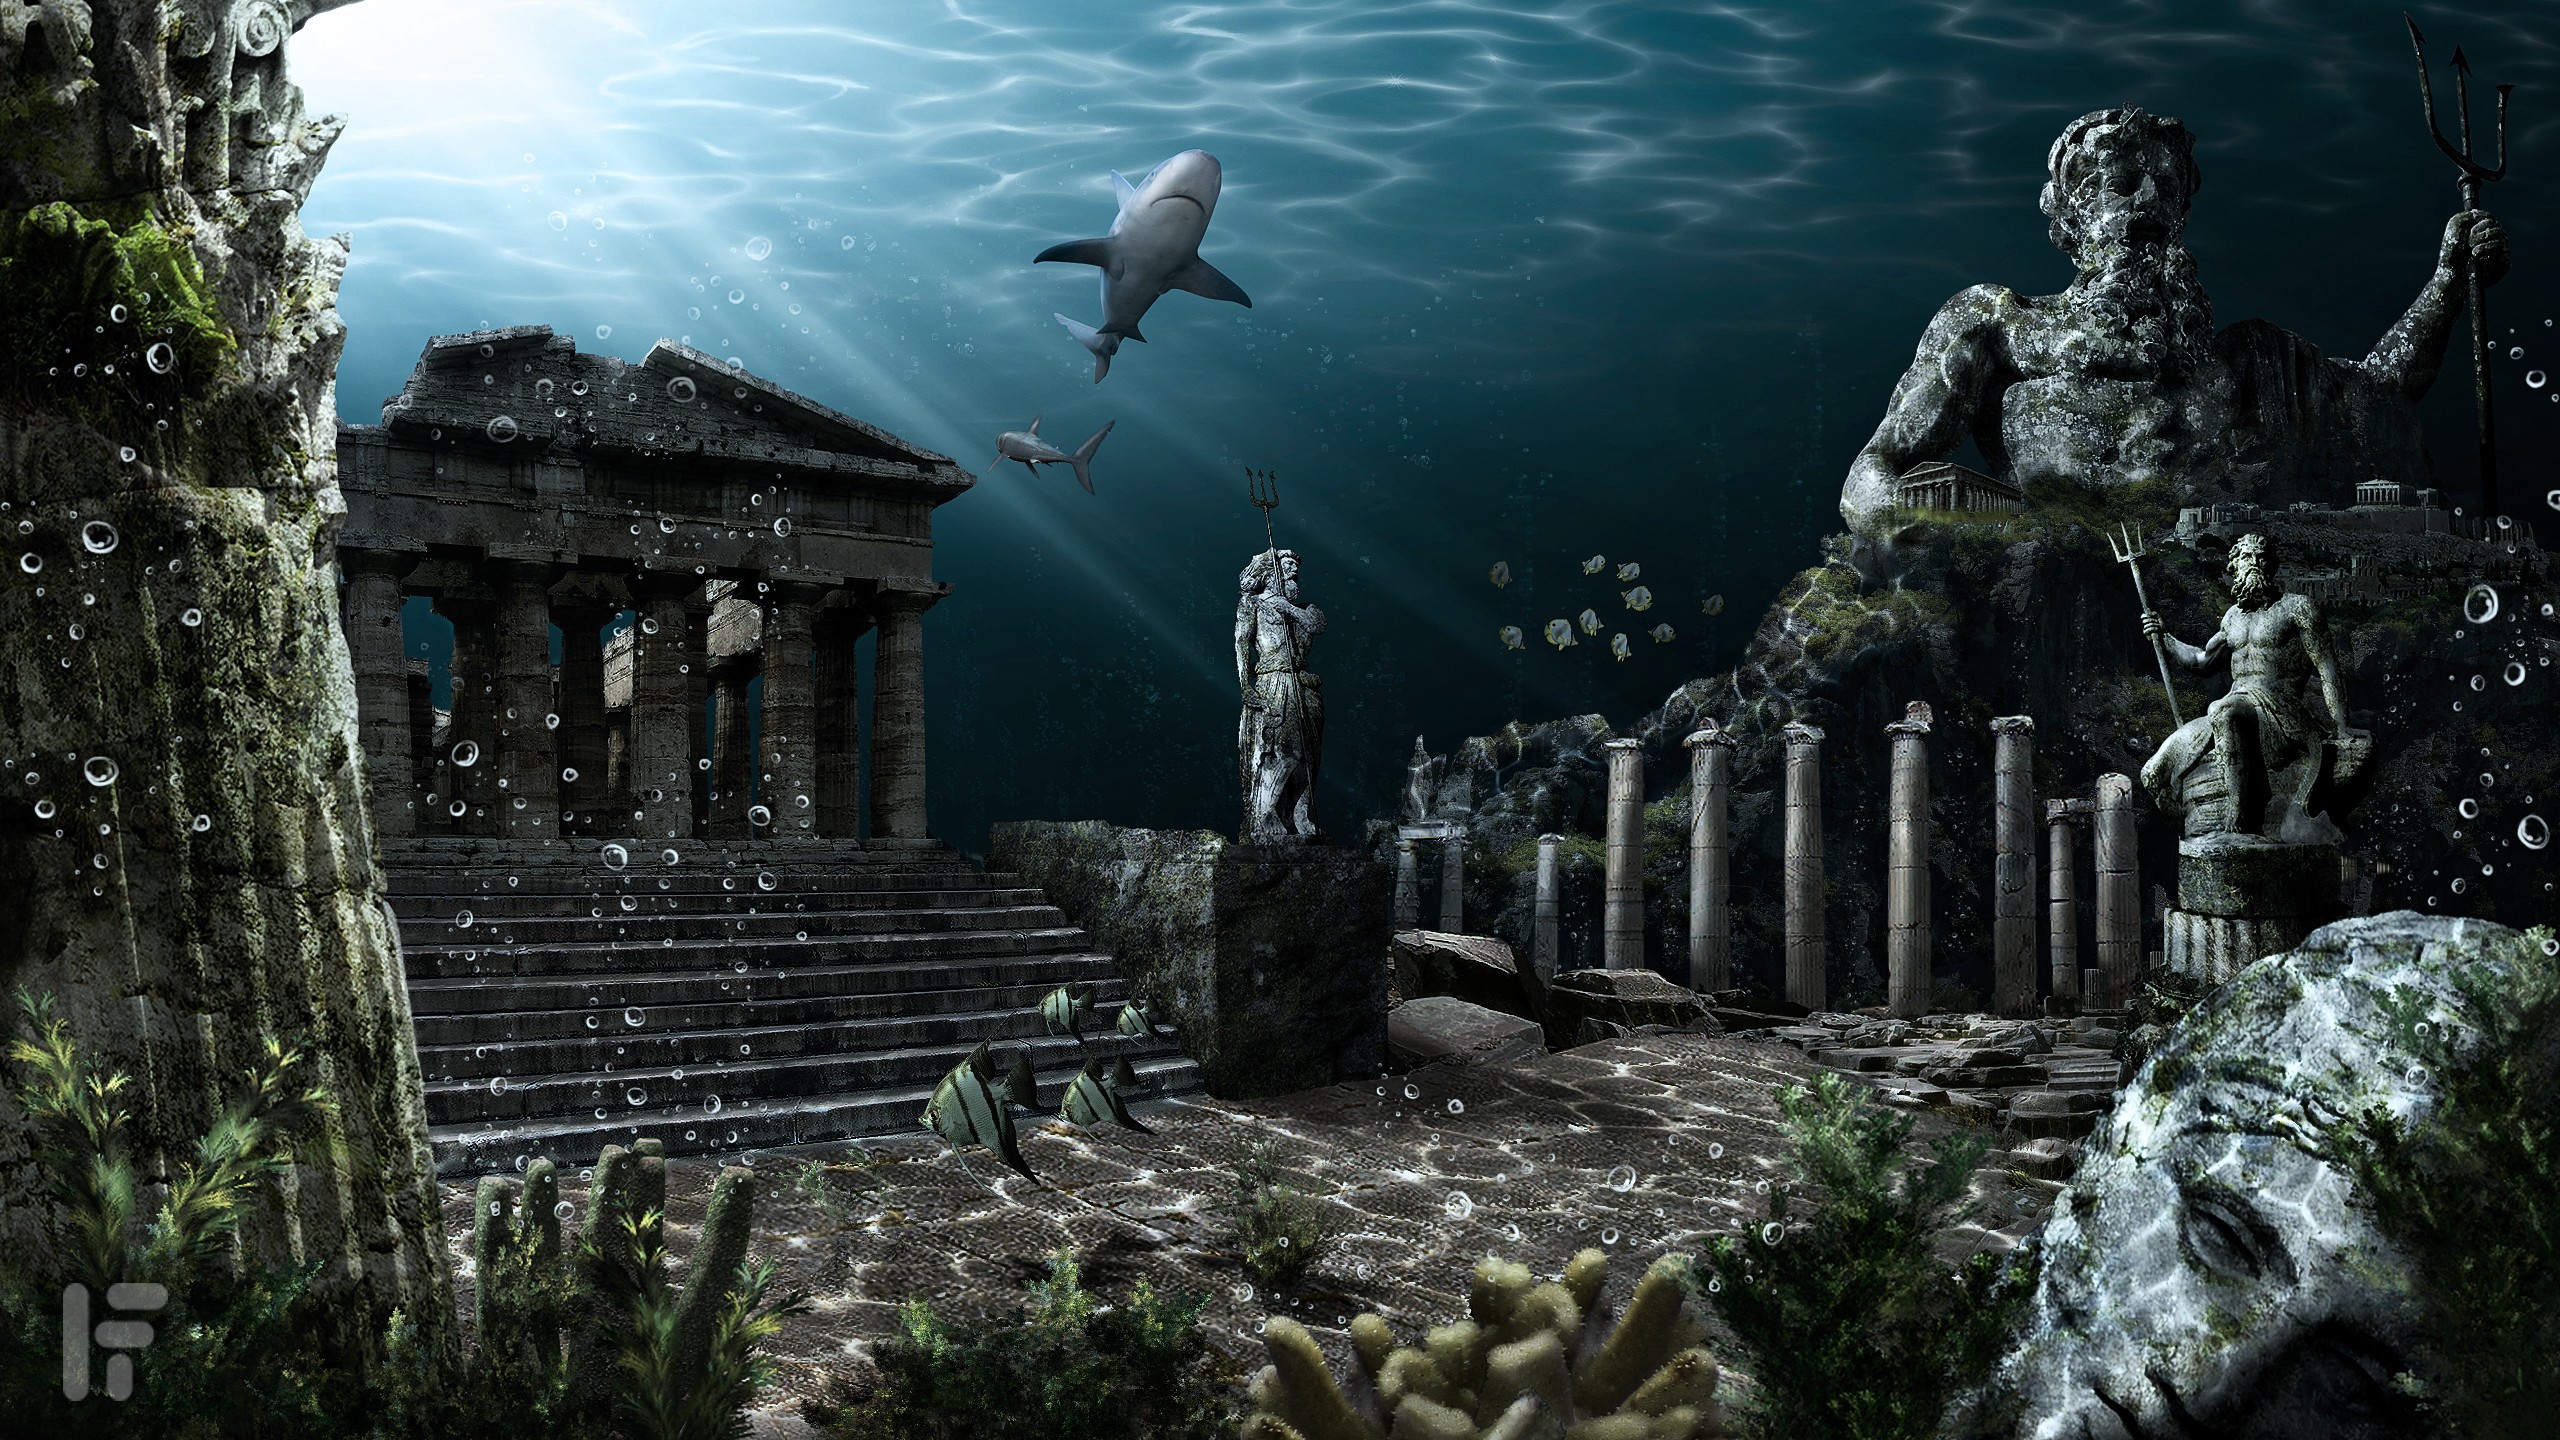 10 Things You Probably Don’t Know About The Lost City Of Atlantis